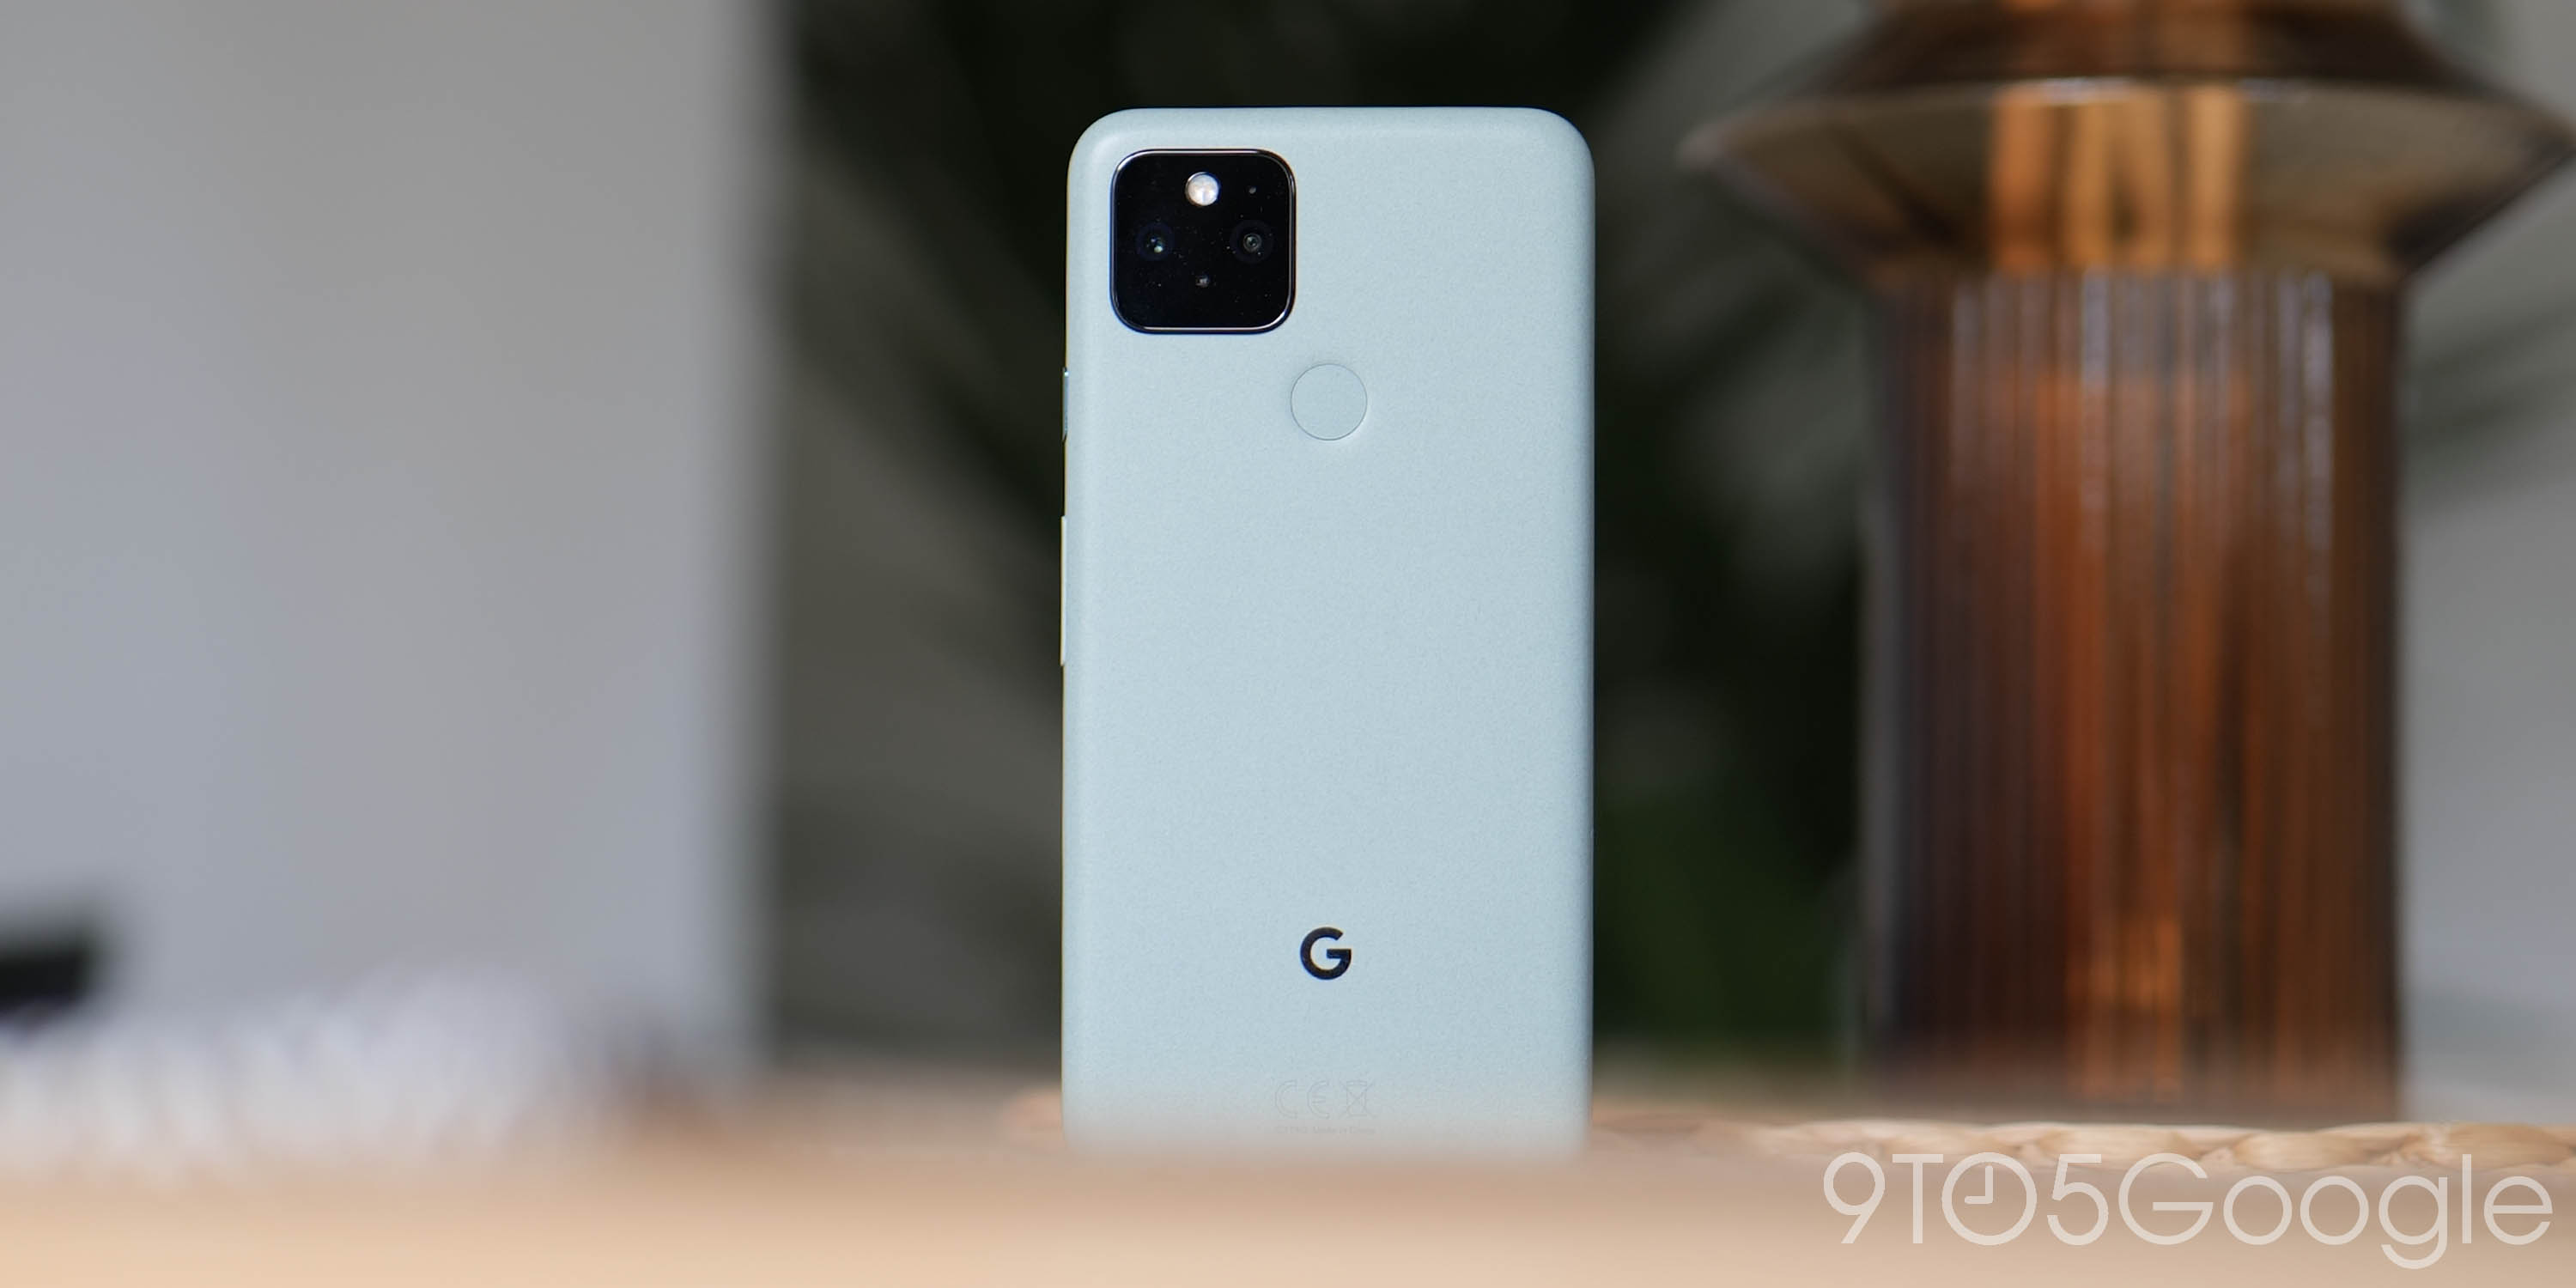 Why we're skeptical that Google planned Pixel 5 w/ Tensor - 9to5Google